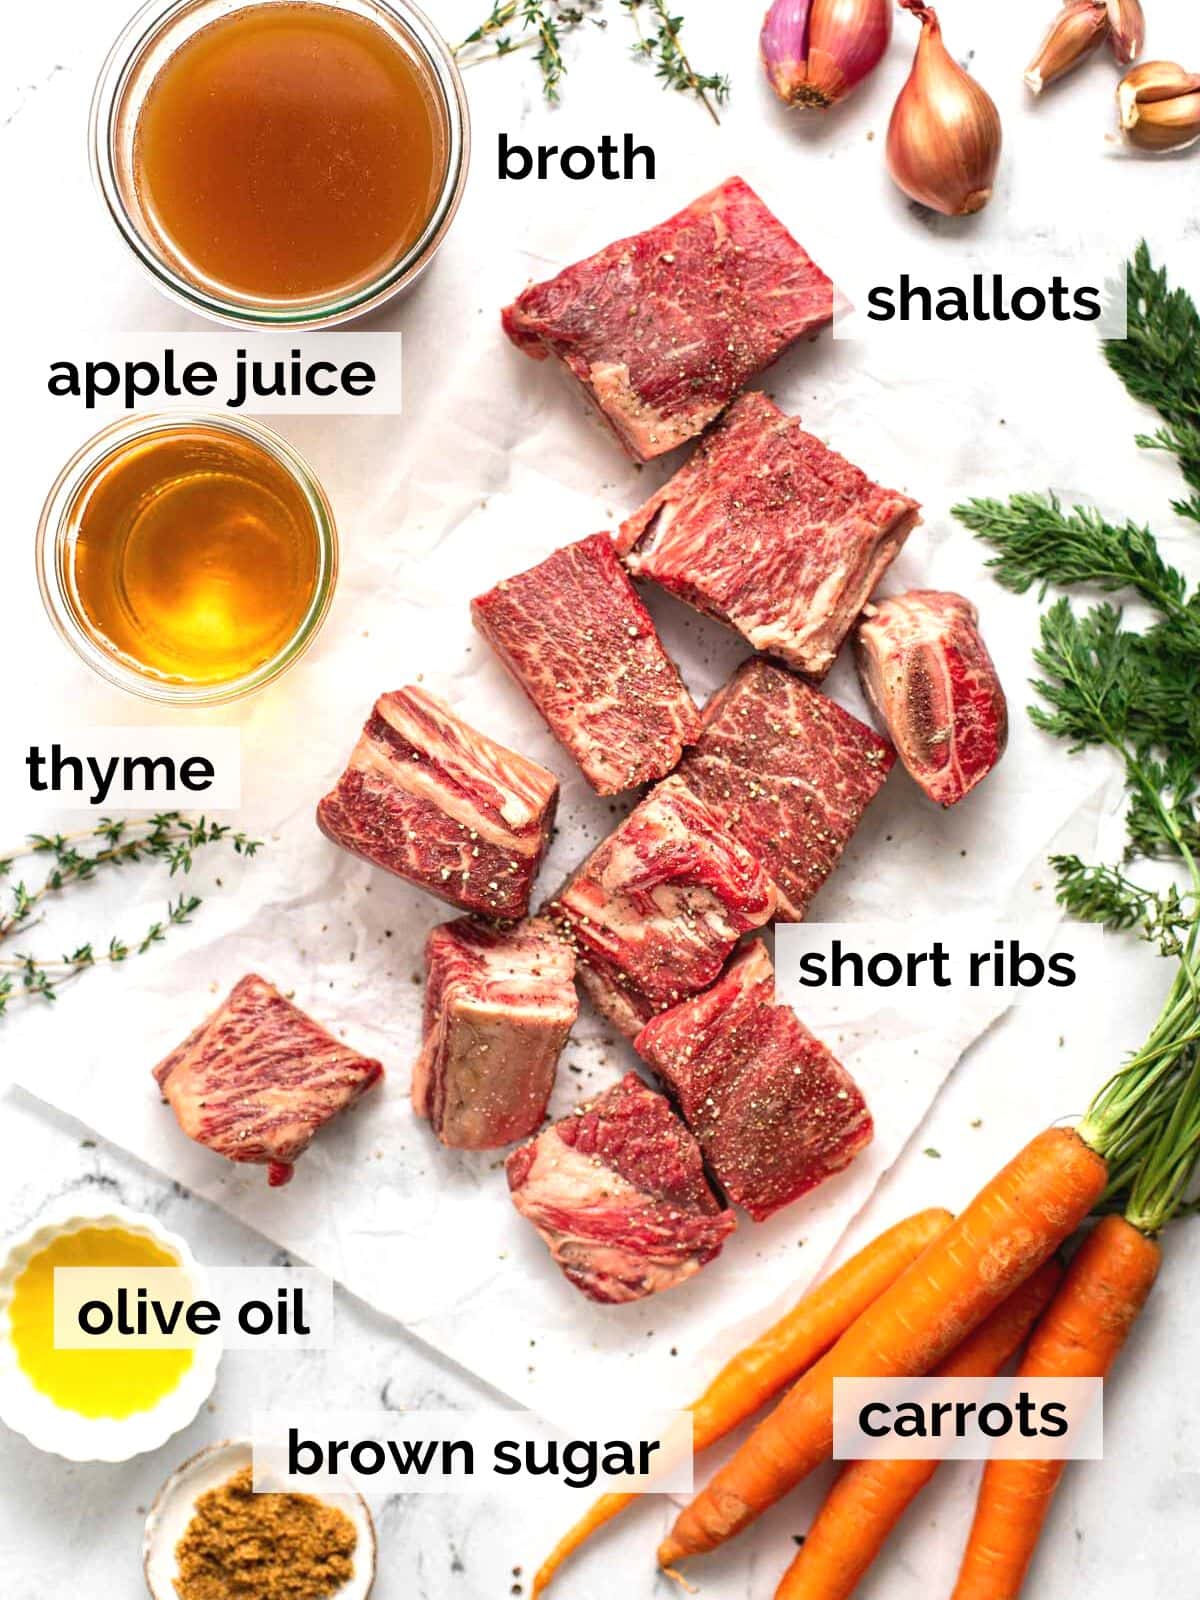 Ingredients for short ribs including broth, carrots, and shallots.